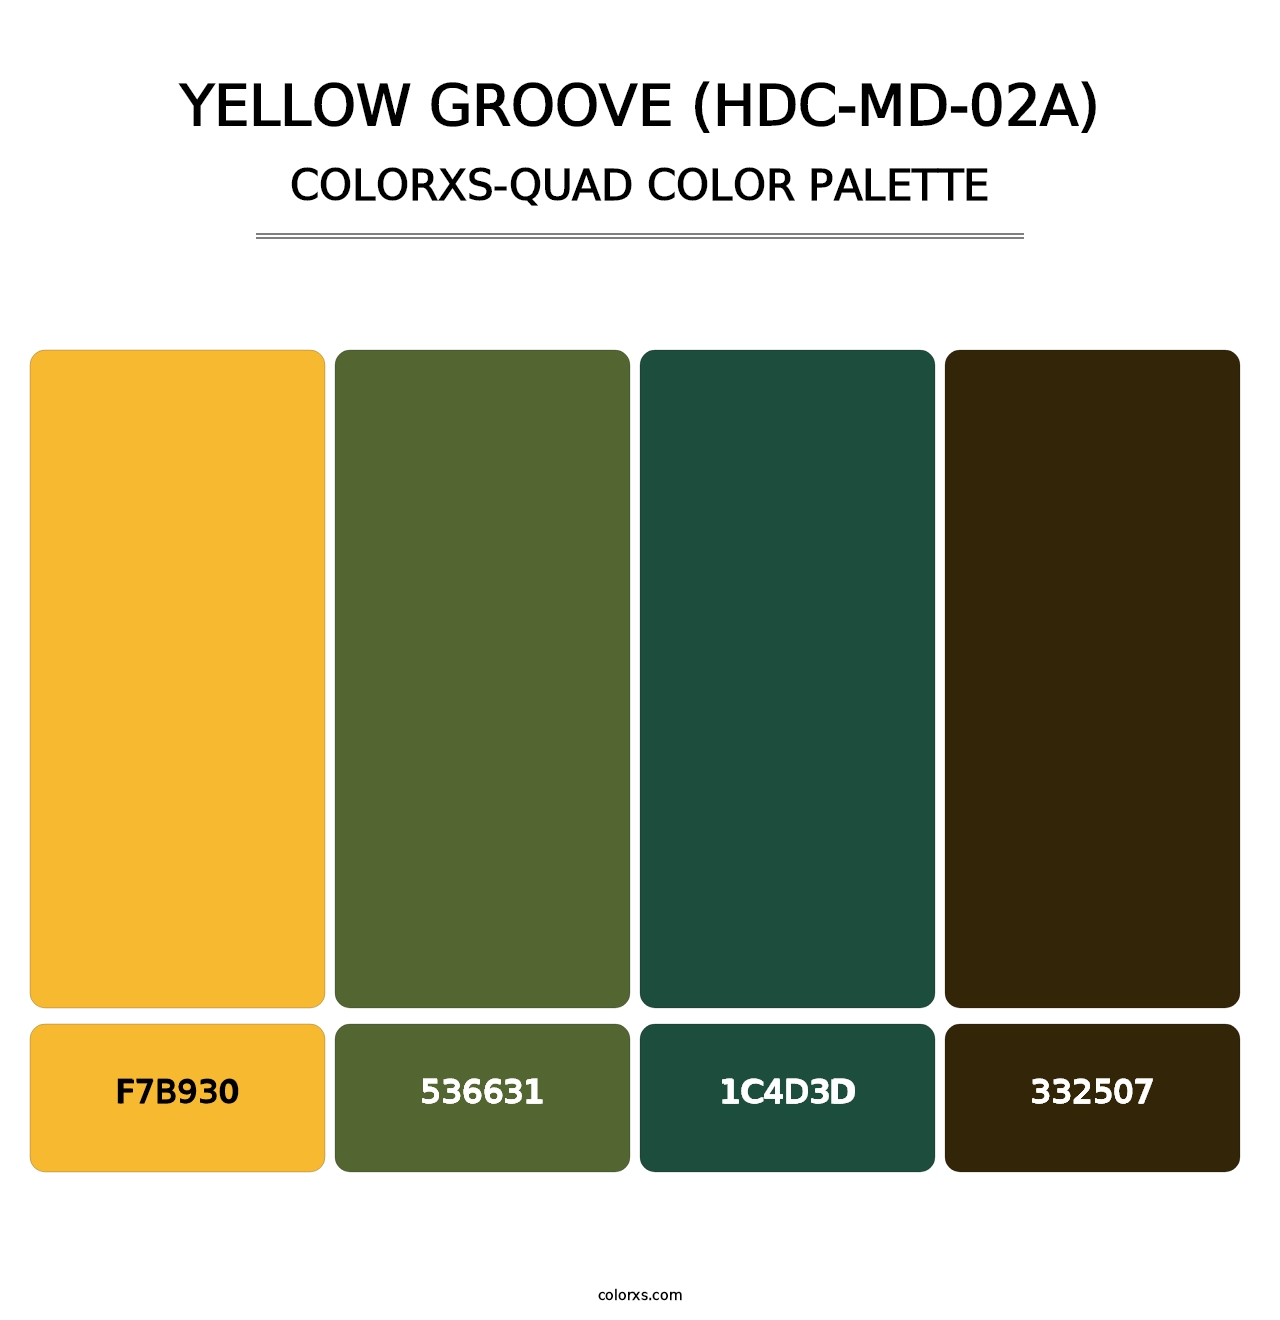 Yellow Groove (HDC-MD-02A) - Colorxs Quad Palette